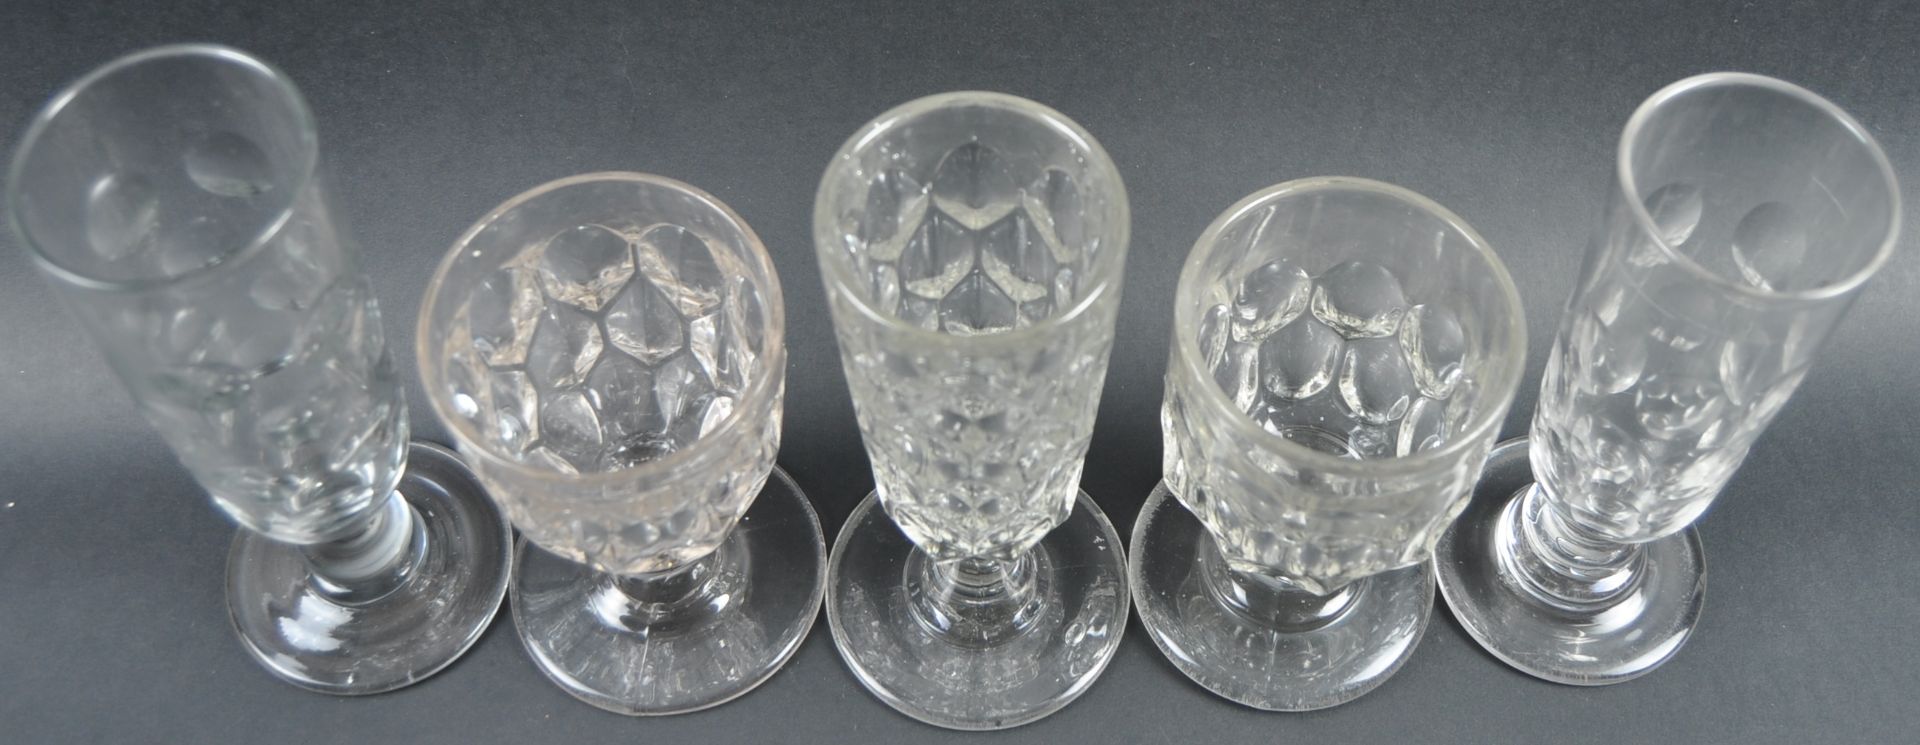 COLLECTION OF 19TH CENTURY GLASSWARE - Image 3 of 7